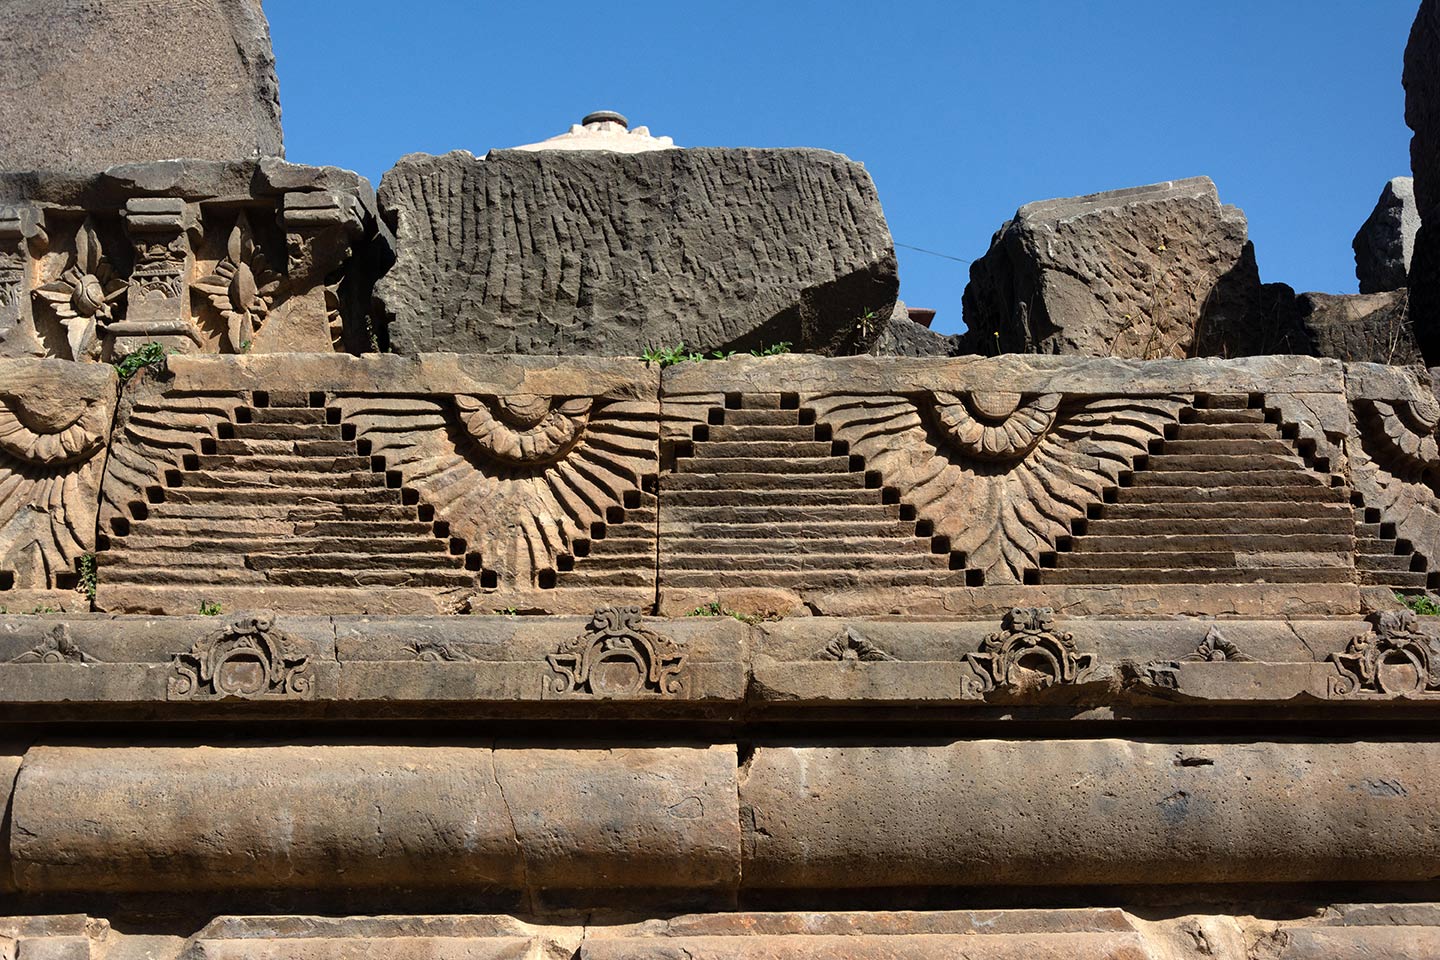 Broken debris from the original temple assembled on the south face of the adhisthana. Relief carvings of geometric, flora and fauna motifs feature all around the adhisthana.